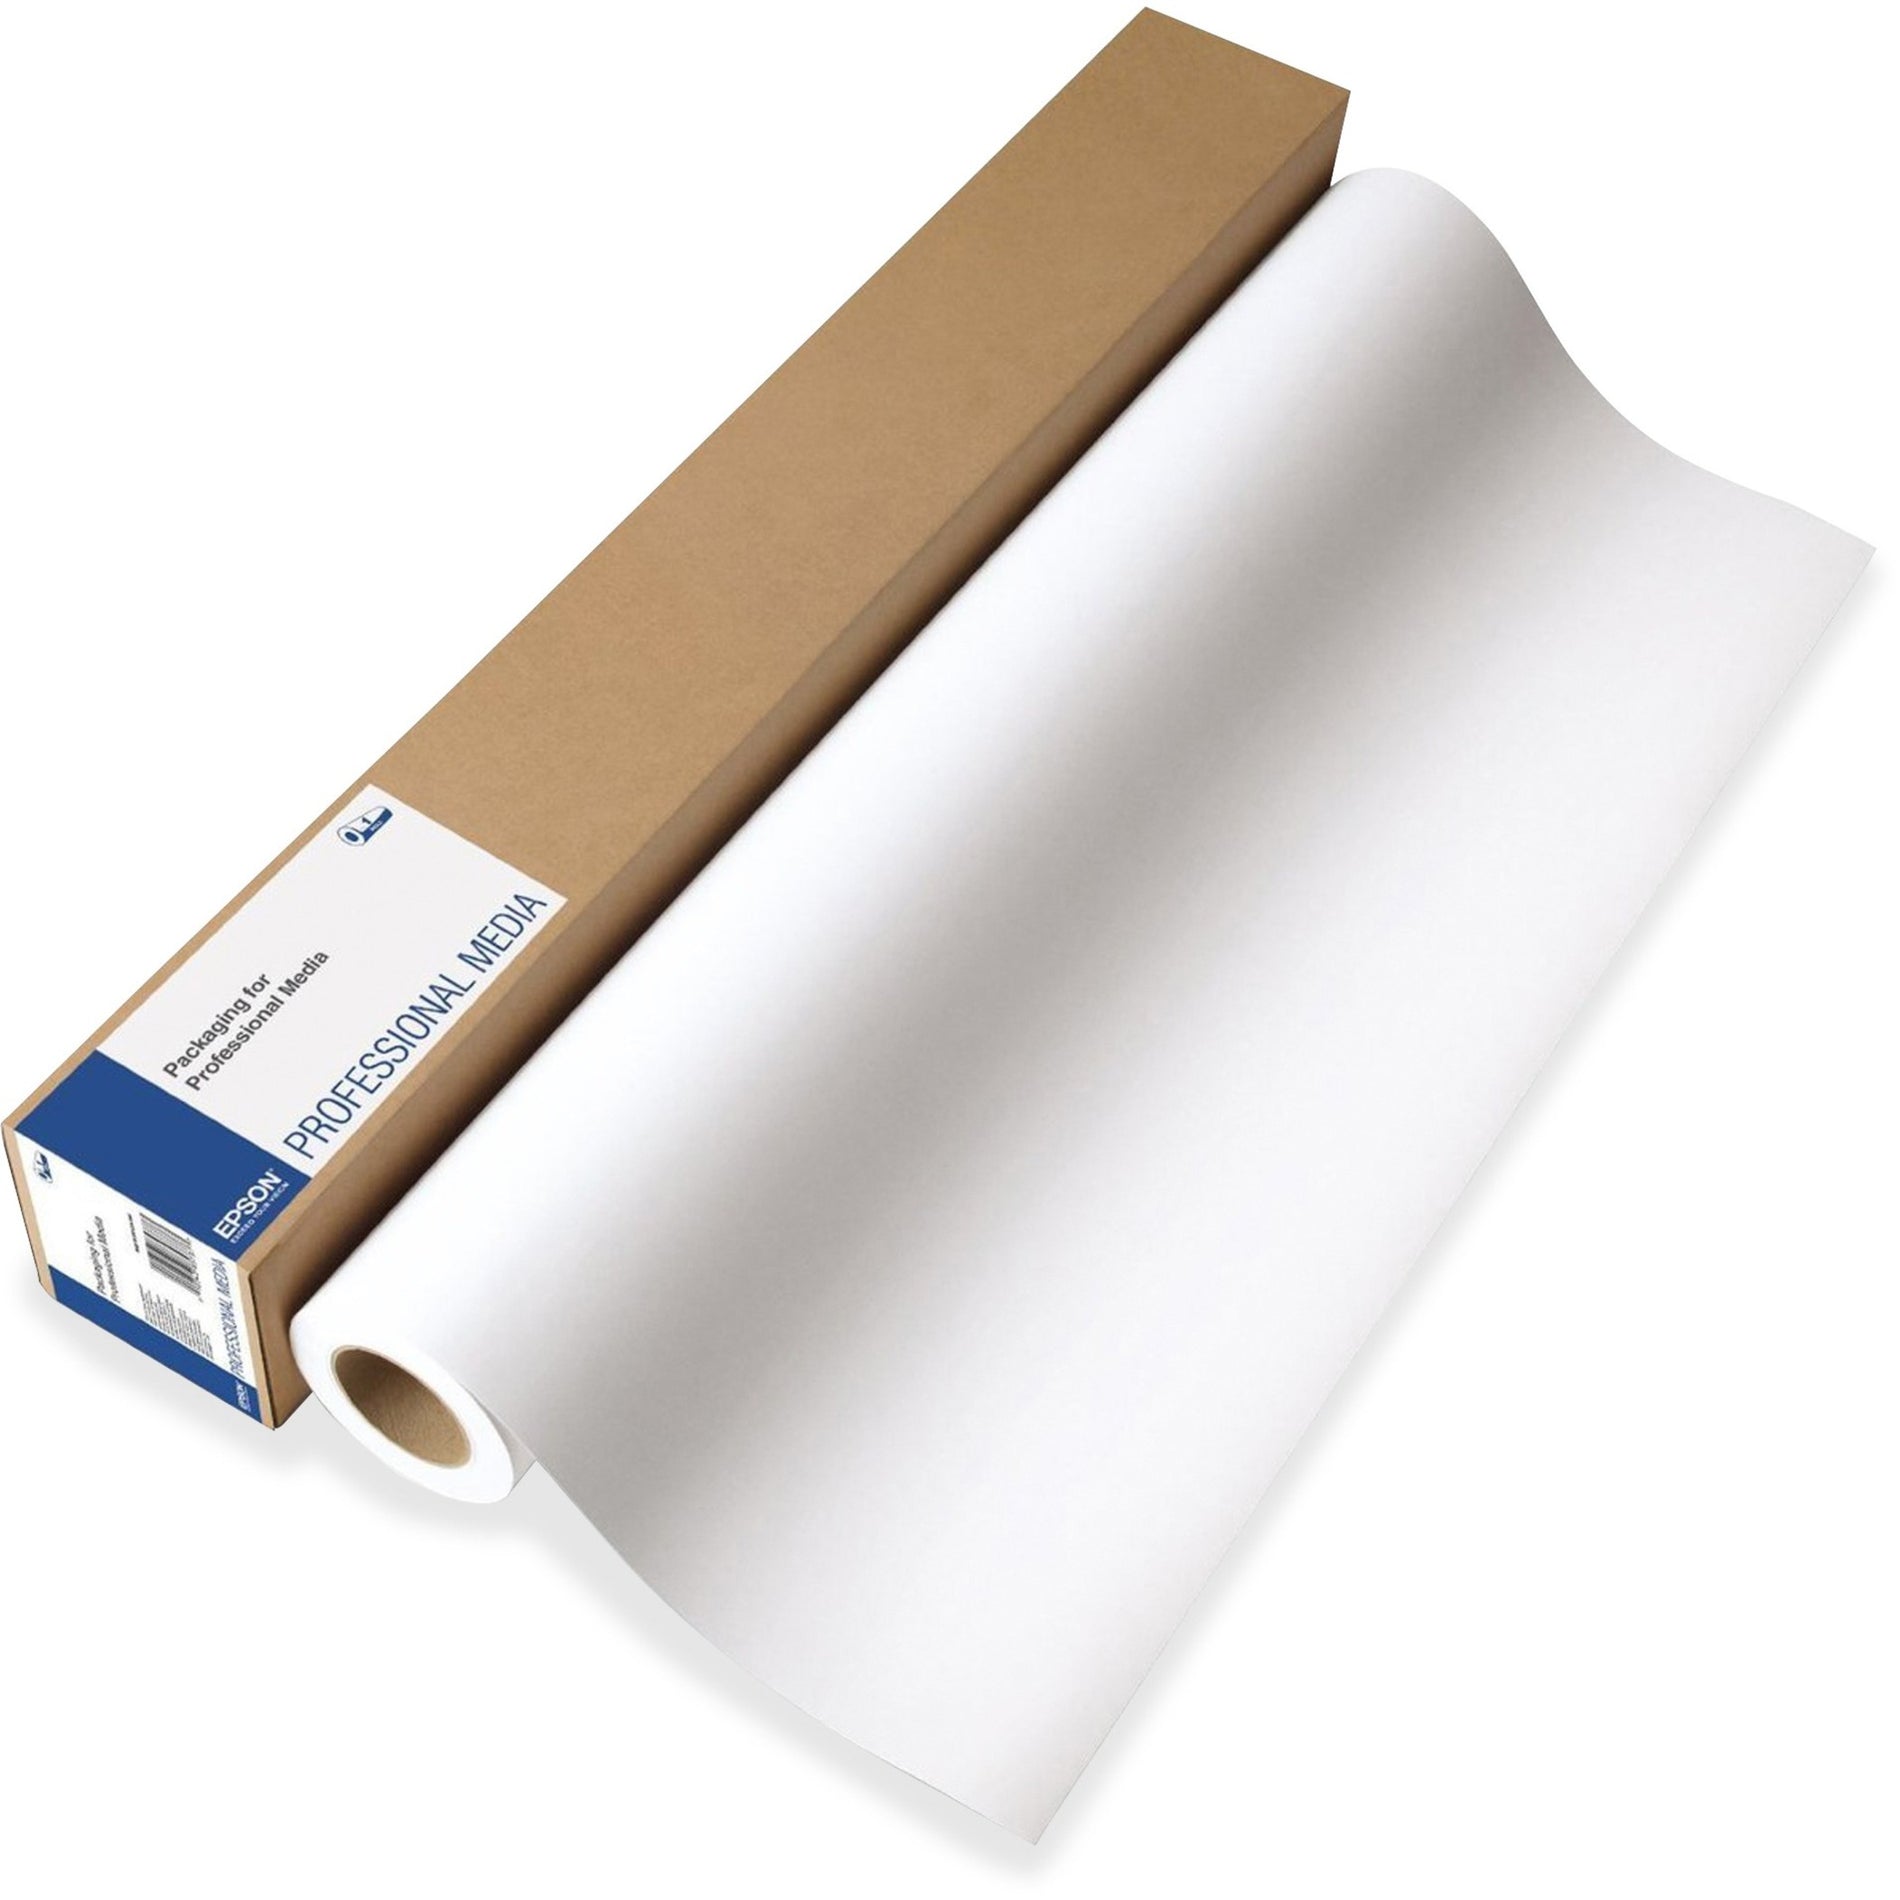 Epson S041387 Photographic Papers, Doubleweight Matte Paper, 44" x 82 ft, 180 g/m²